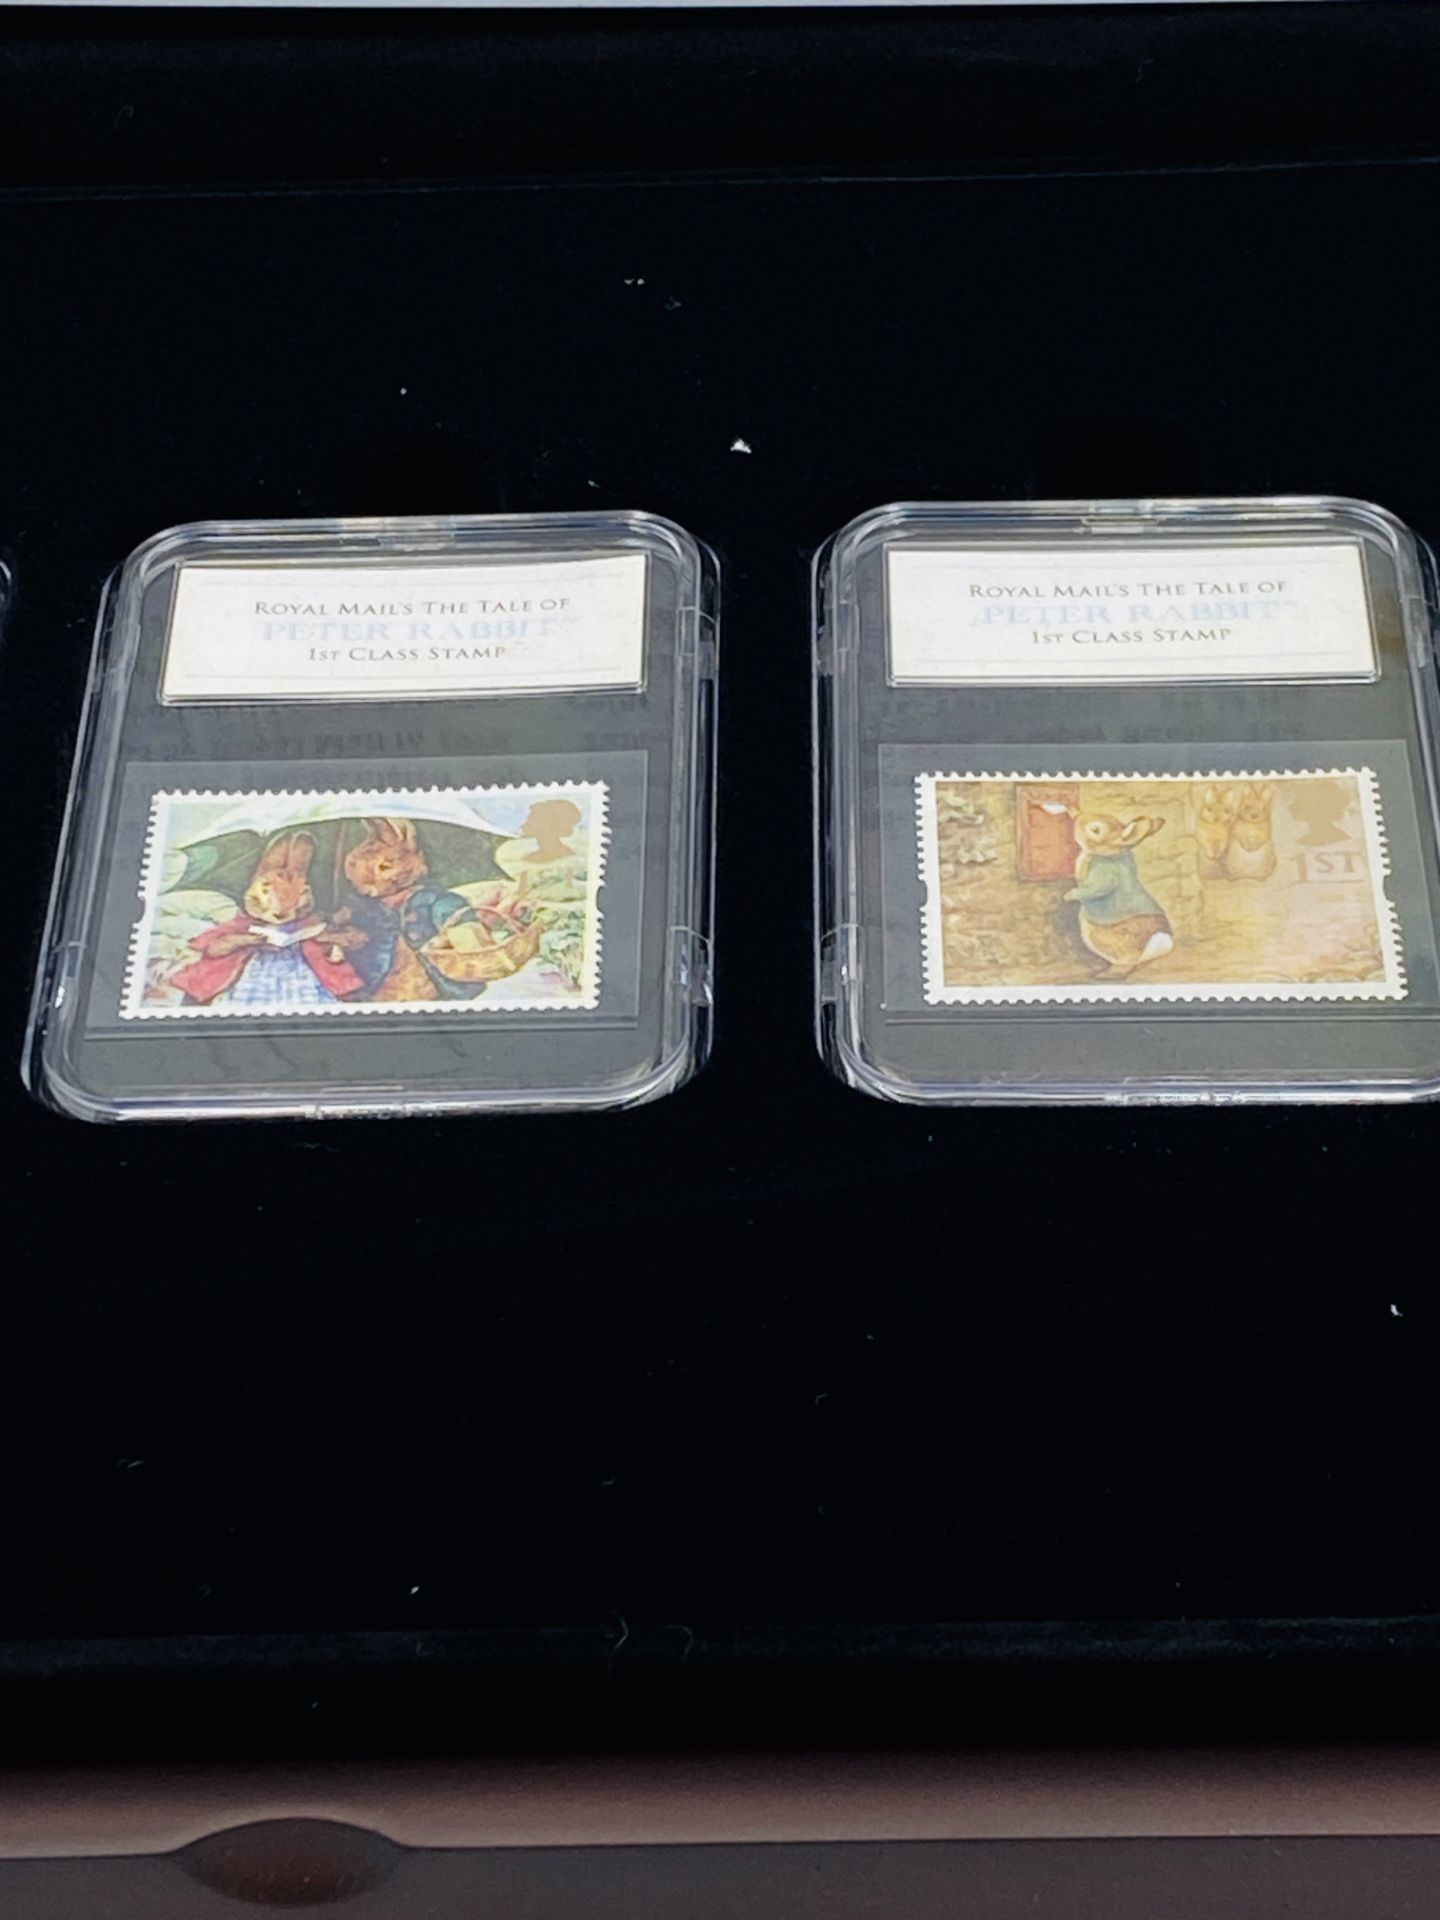 Two limited edition Beatrix Potter three stamp sets, in presentation boxes - Image 7 of 7